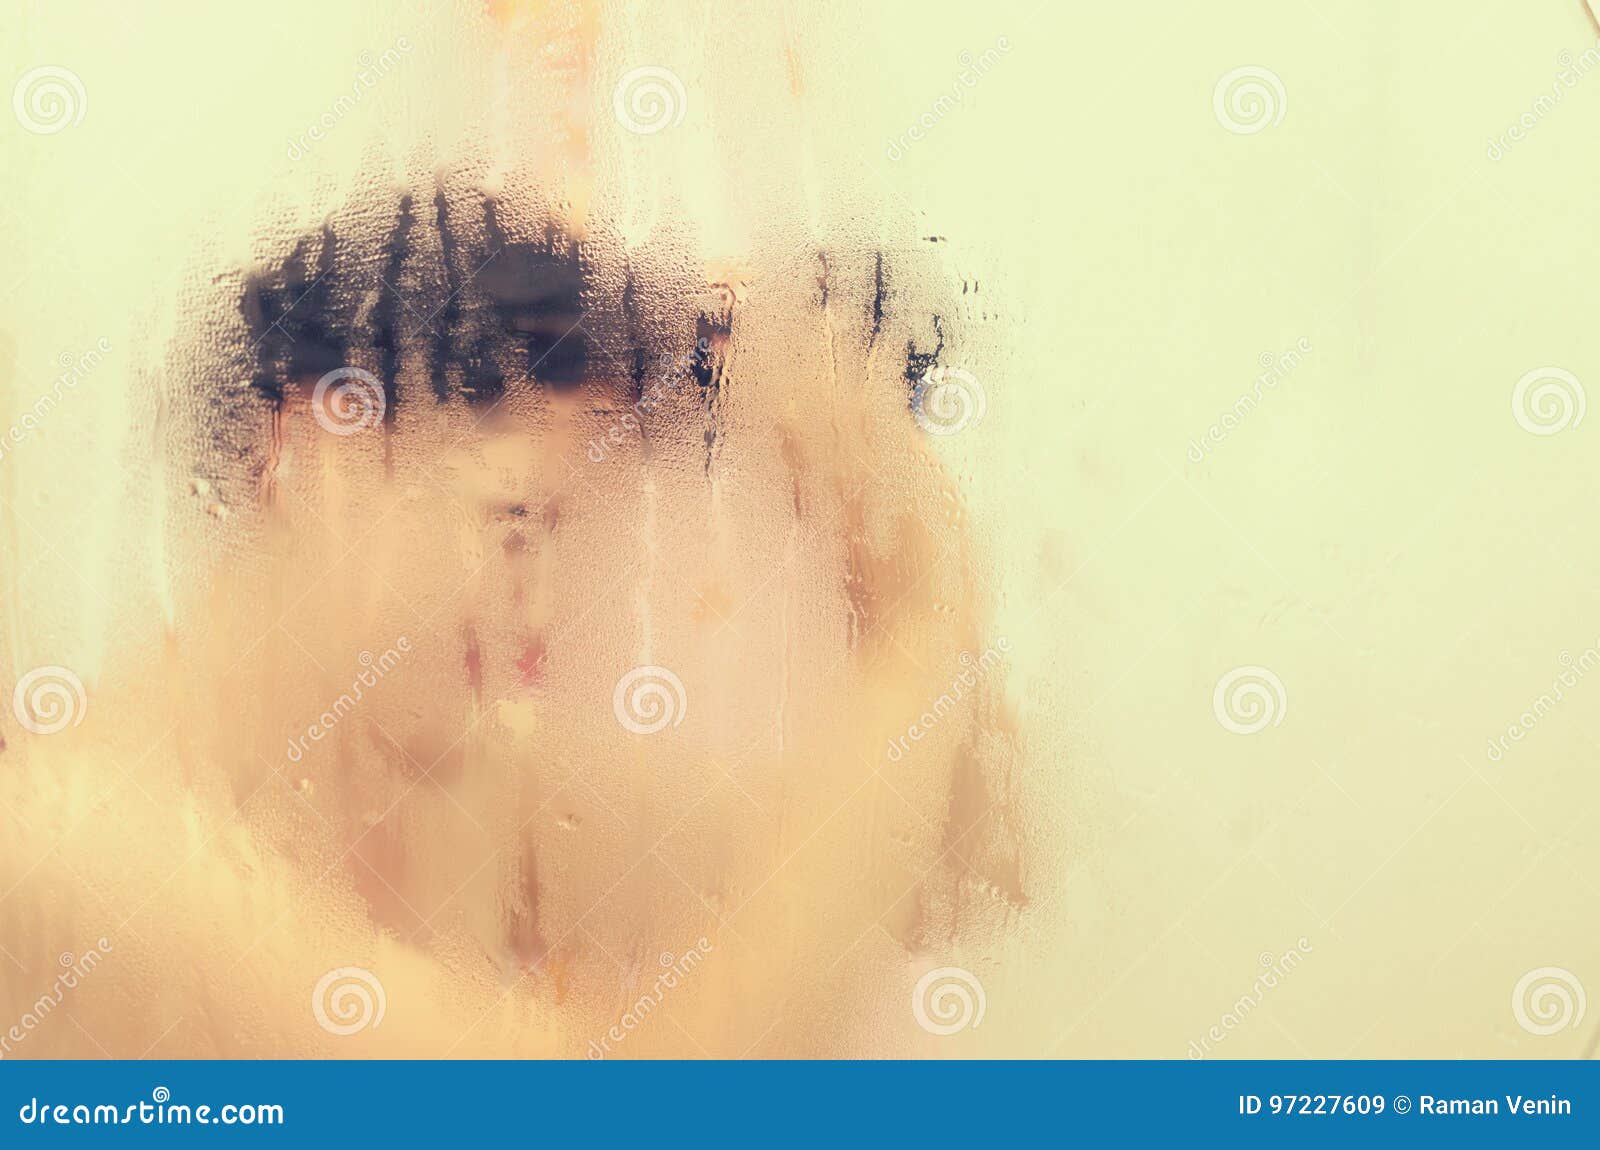 The Girl Takes A Shower In The Bathroom Stock Image Image Of Female